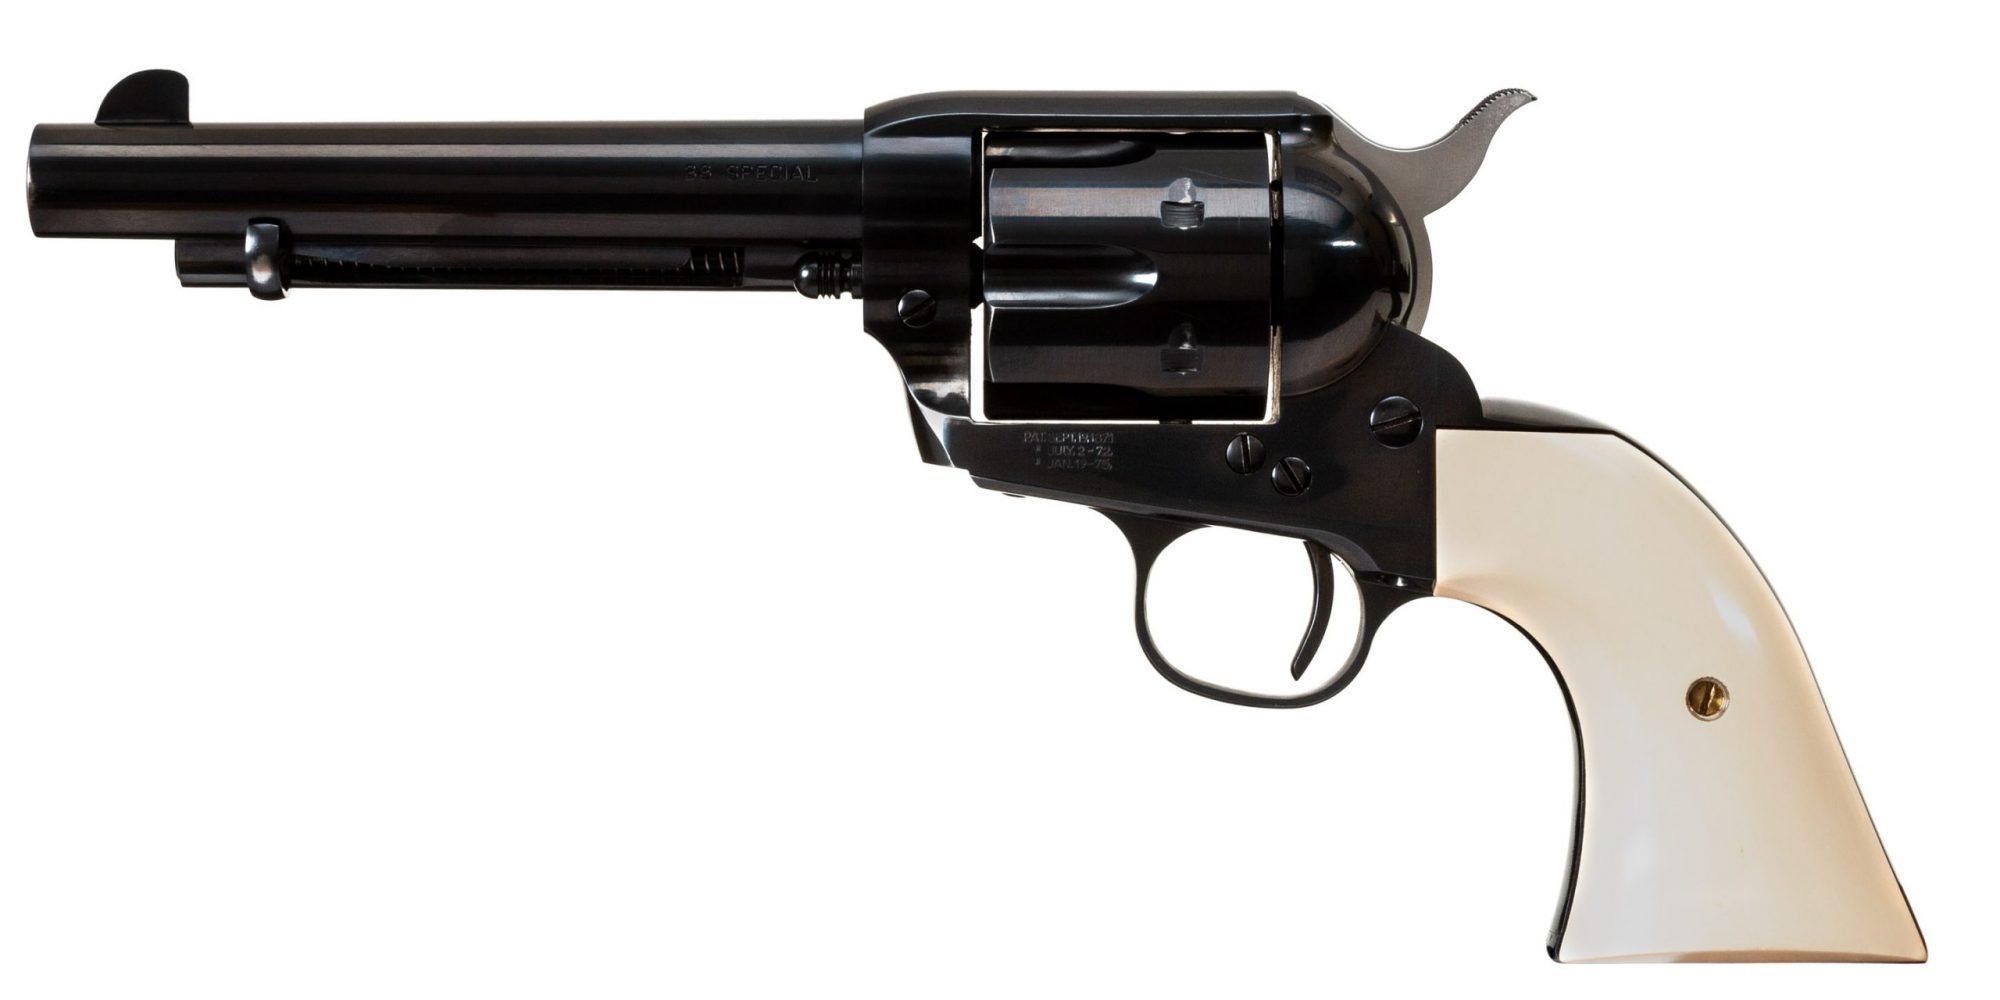 Photo of a U.S. Fire Arms (USFA) Single Action Army (SAA) Revolver featuring USFA Dome Blue finish by Turnbull Restoration of Bloomfield, NY